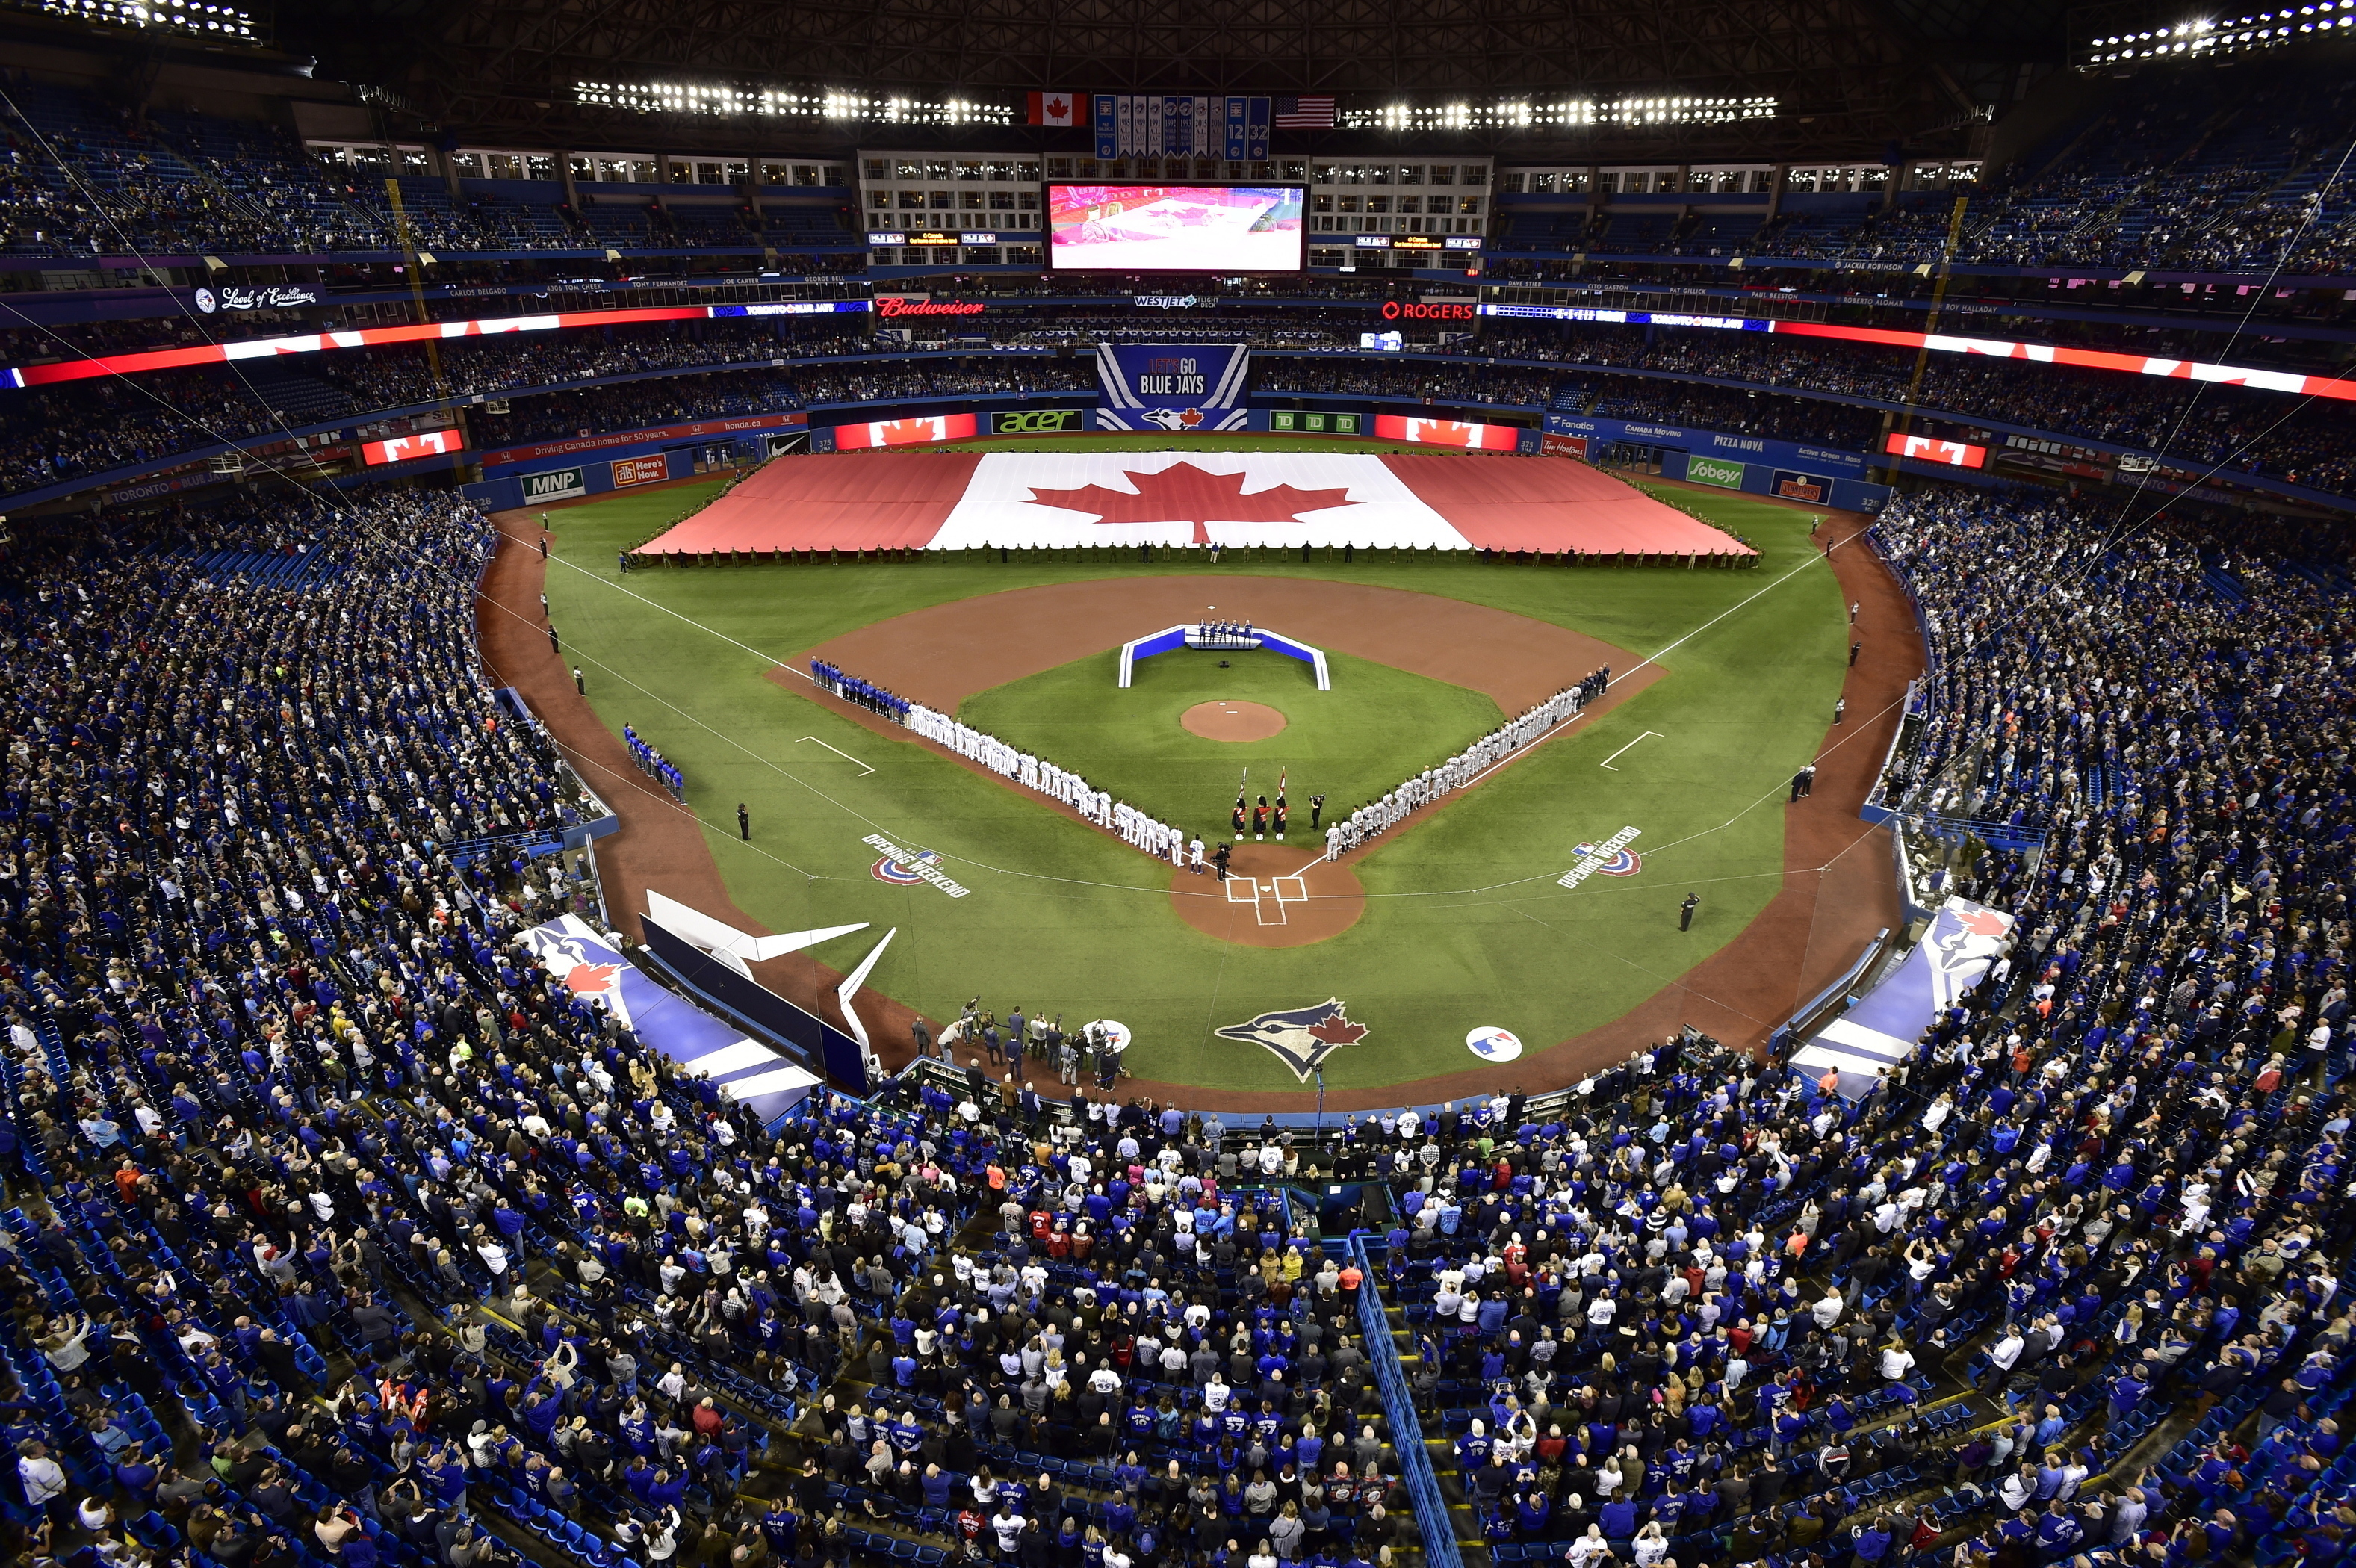 Blue Jays receive approval to resume games in Toronto beginning July 30 -  The Boston Globe